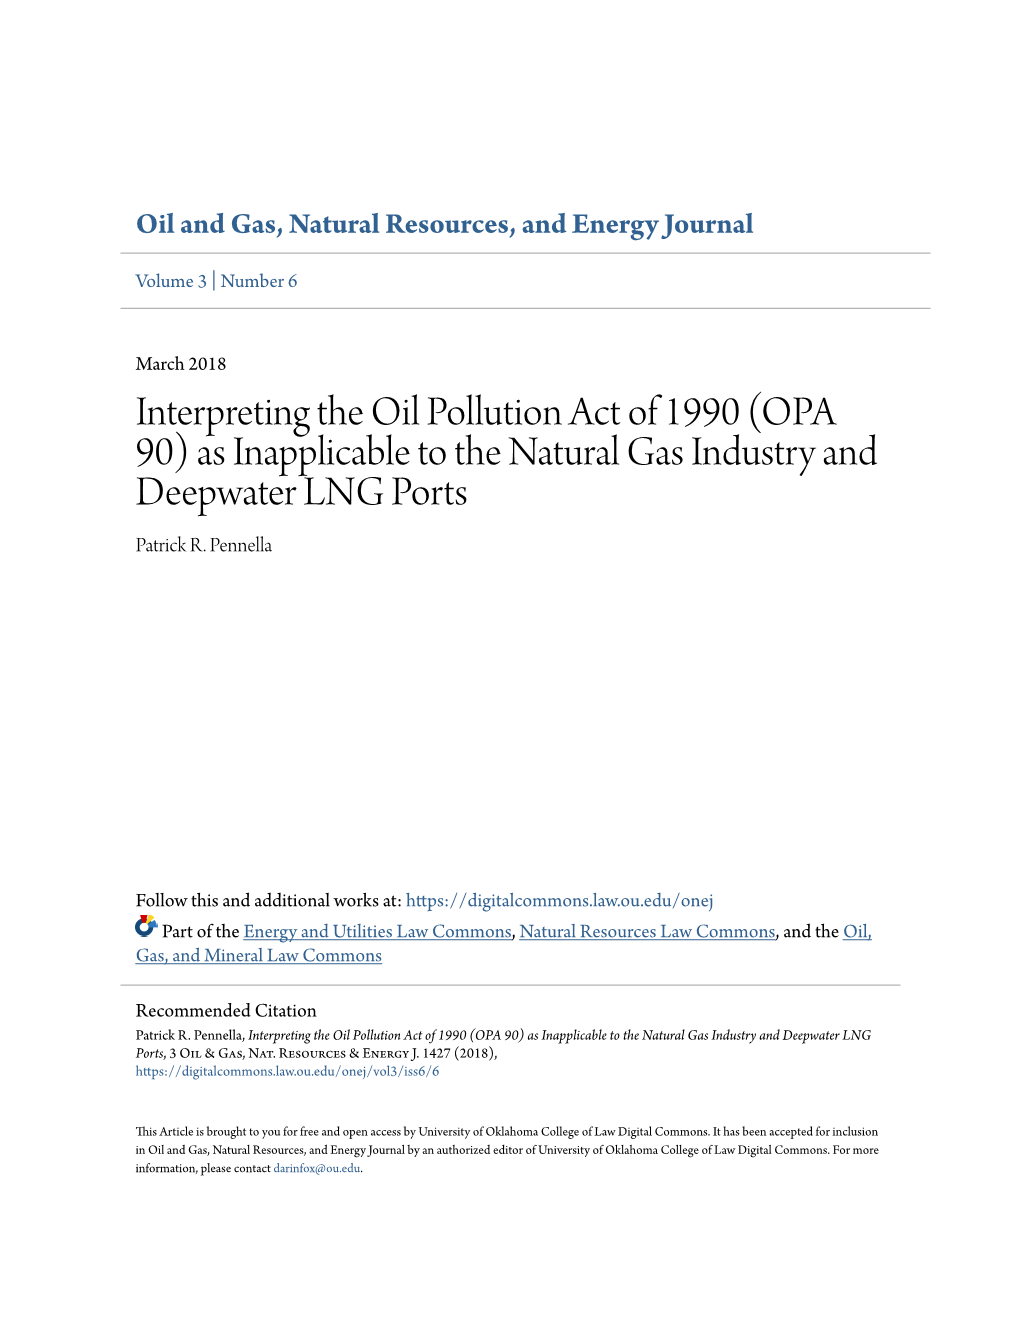 OPA 90) As Inapplicable to the Natural Gas Industry and Deepwater LNG Ports Patrick R